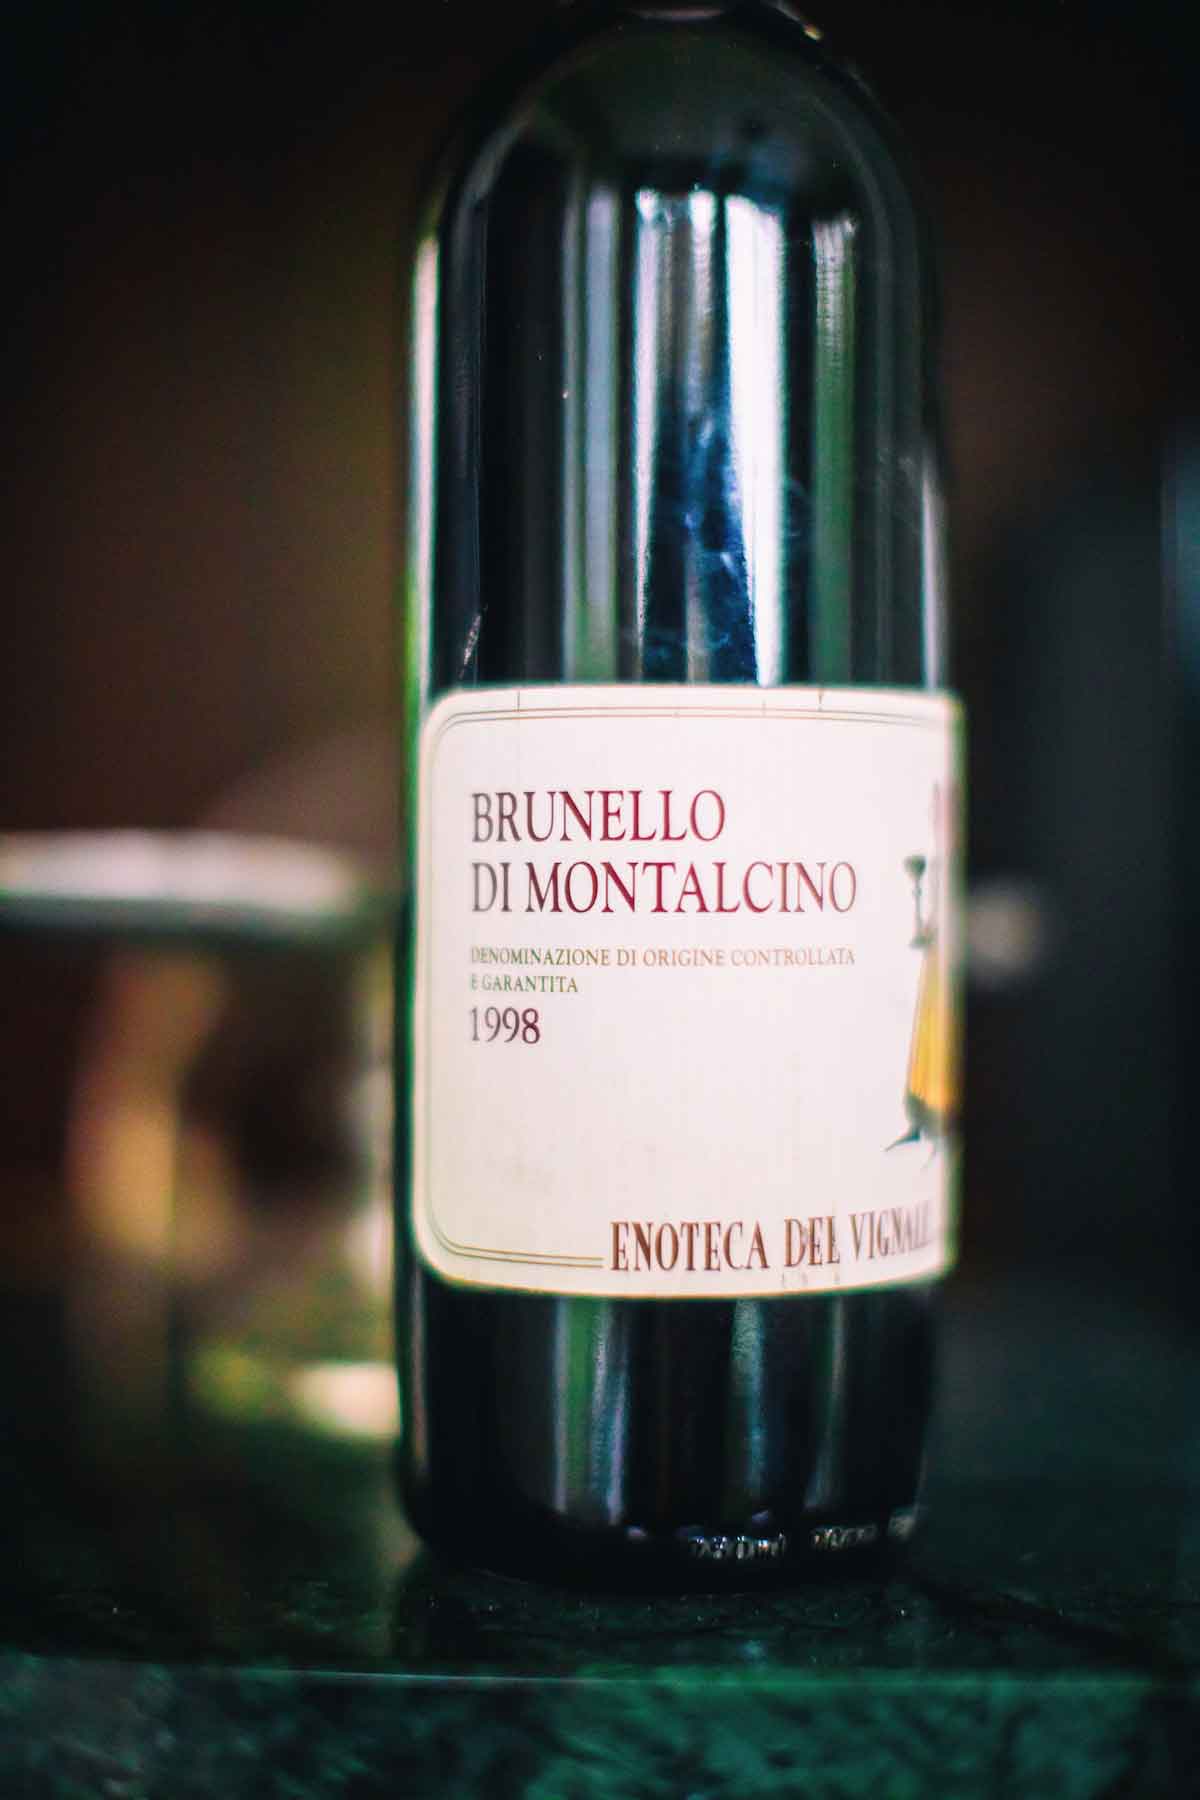 Close up of the label on a bottle of 1998 Brunello di Montalcino wine